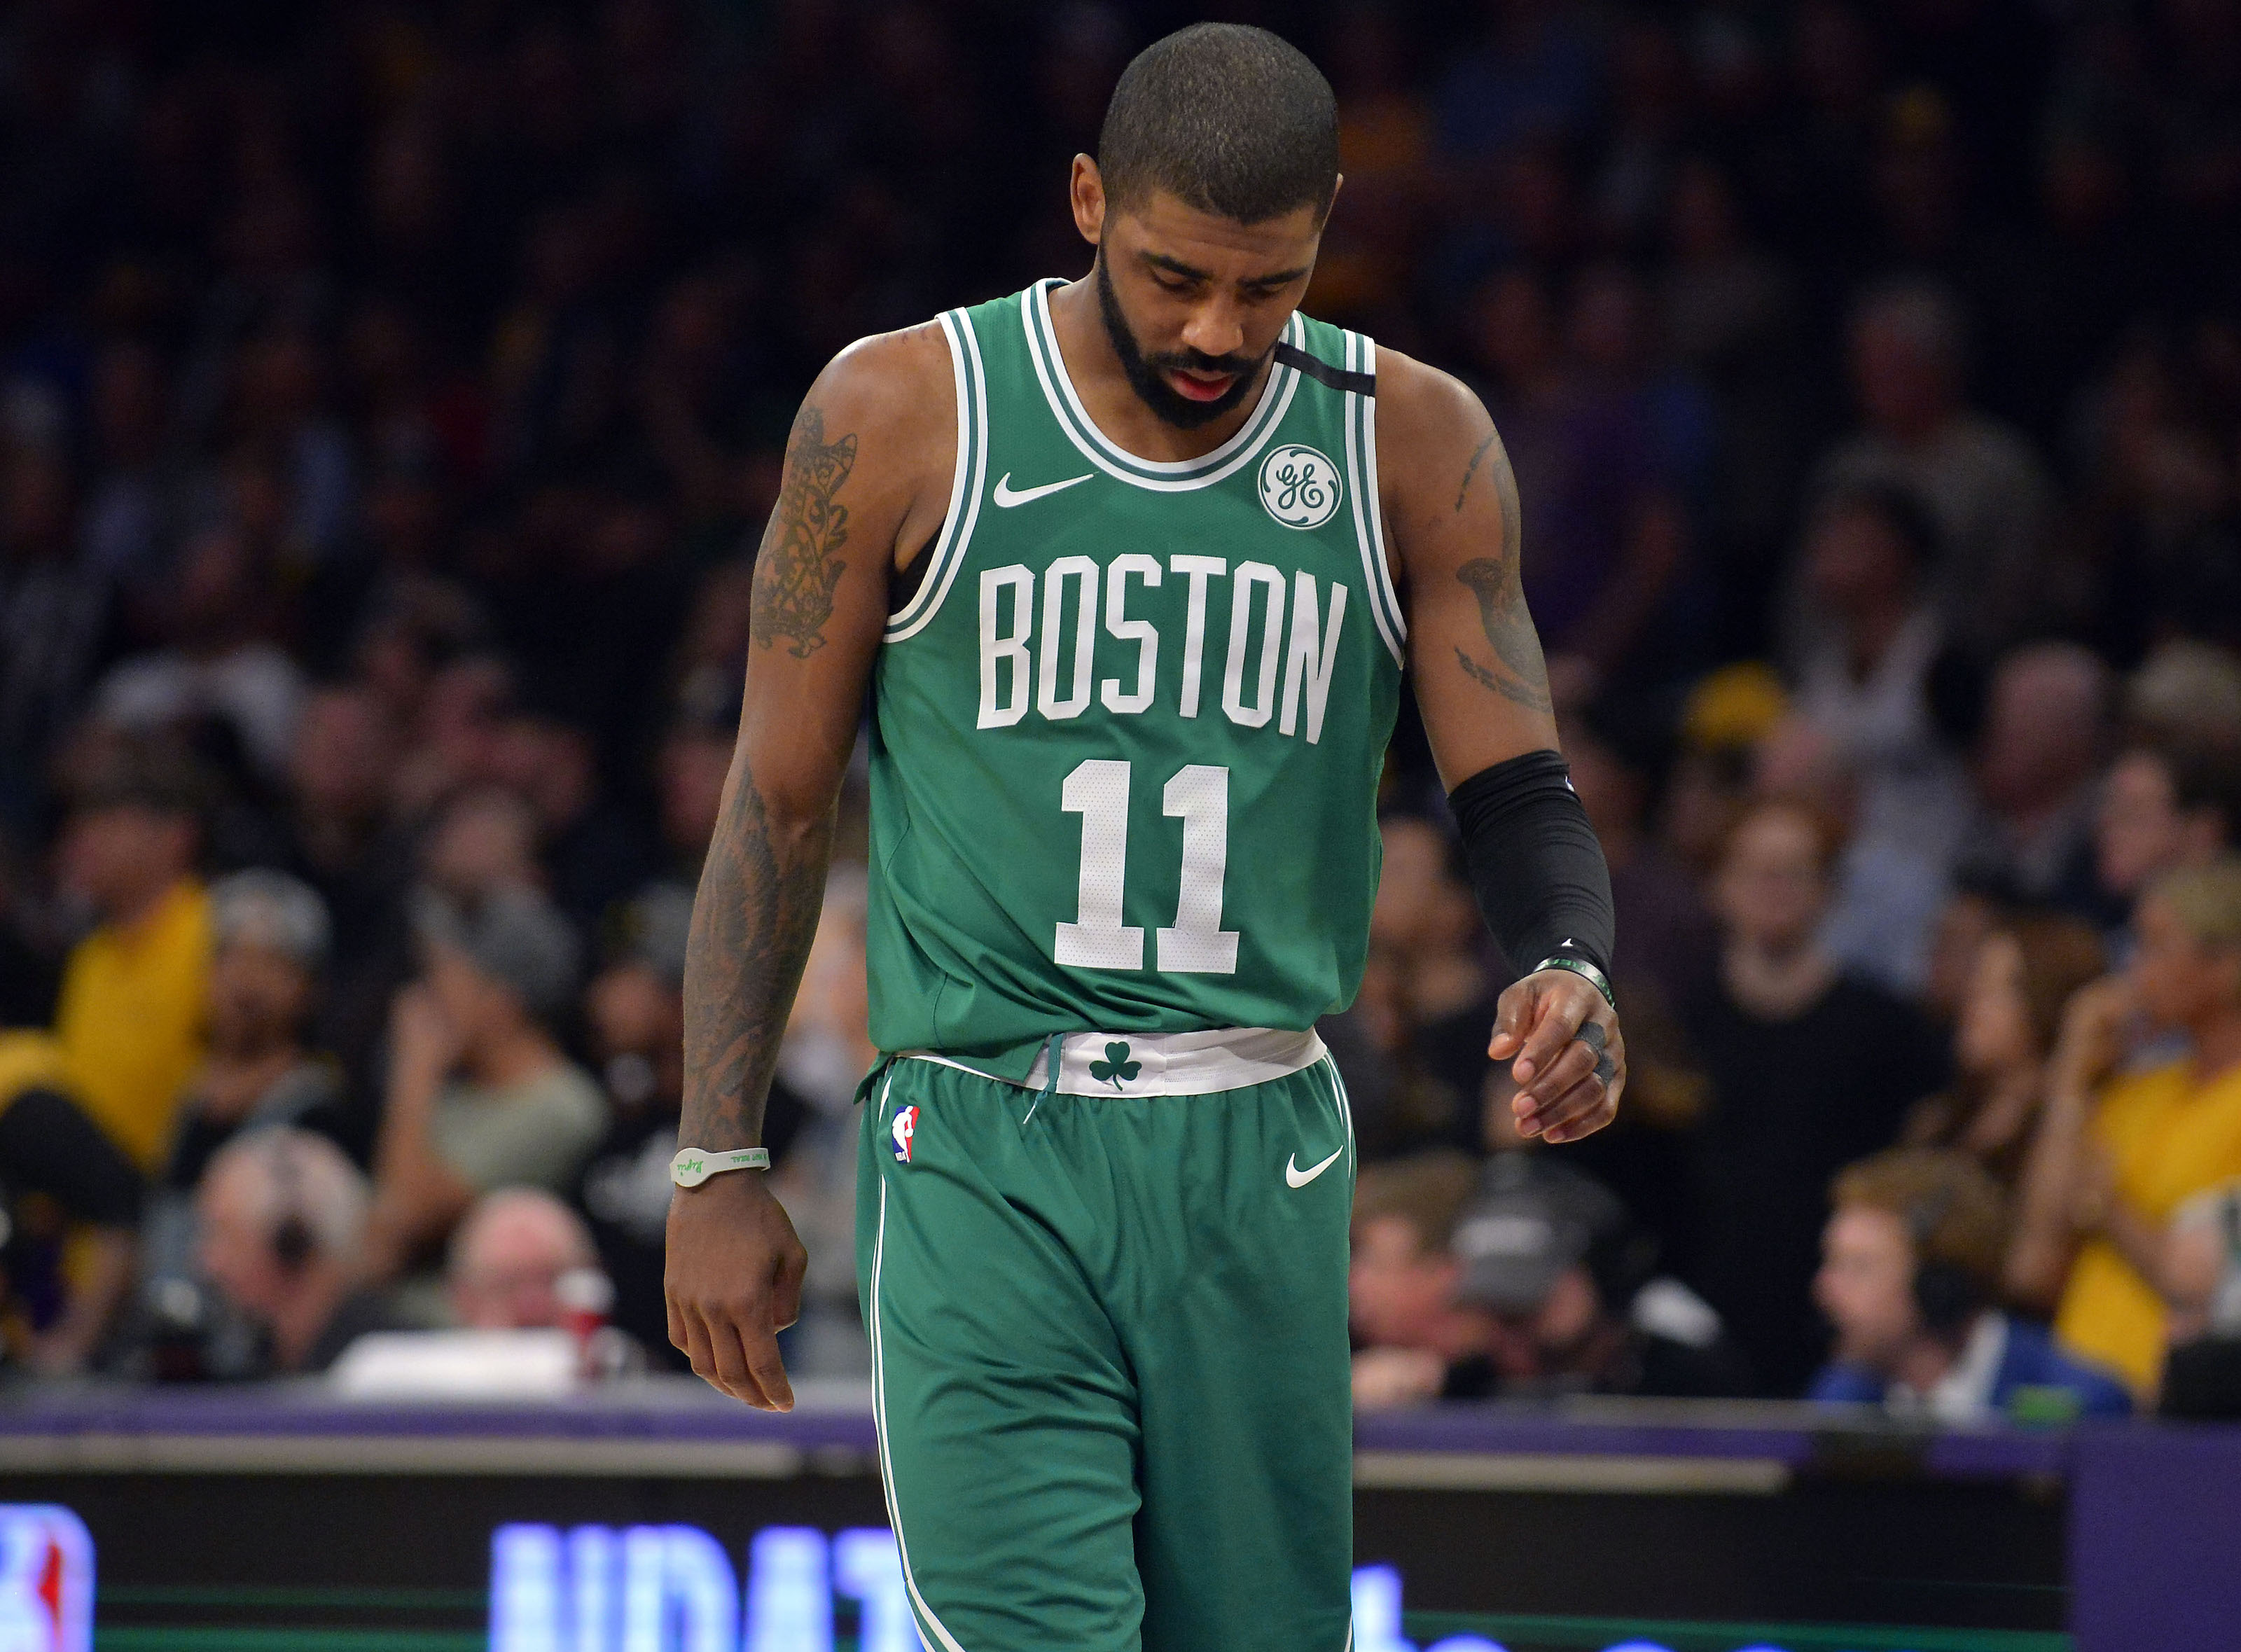 Kyrie Irving Out for Season: What’s Next for Celtics?